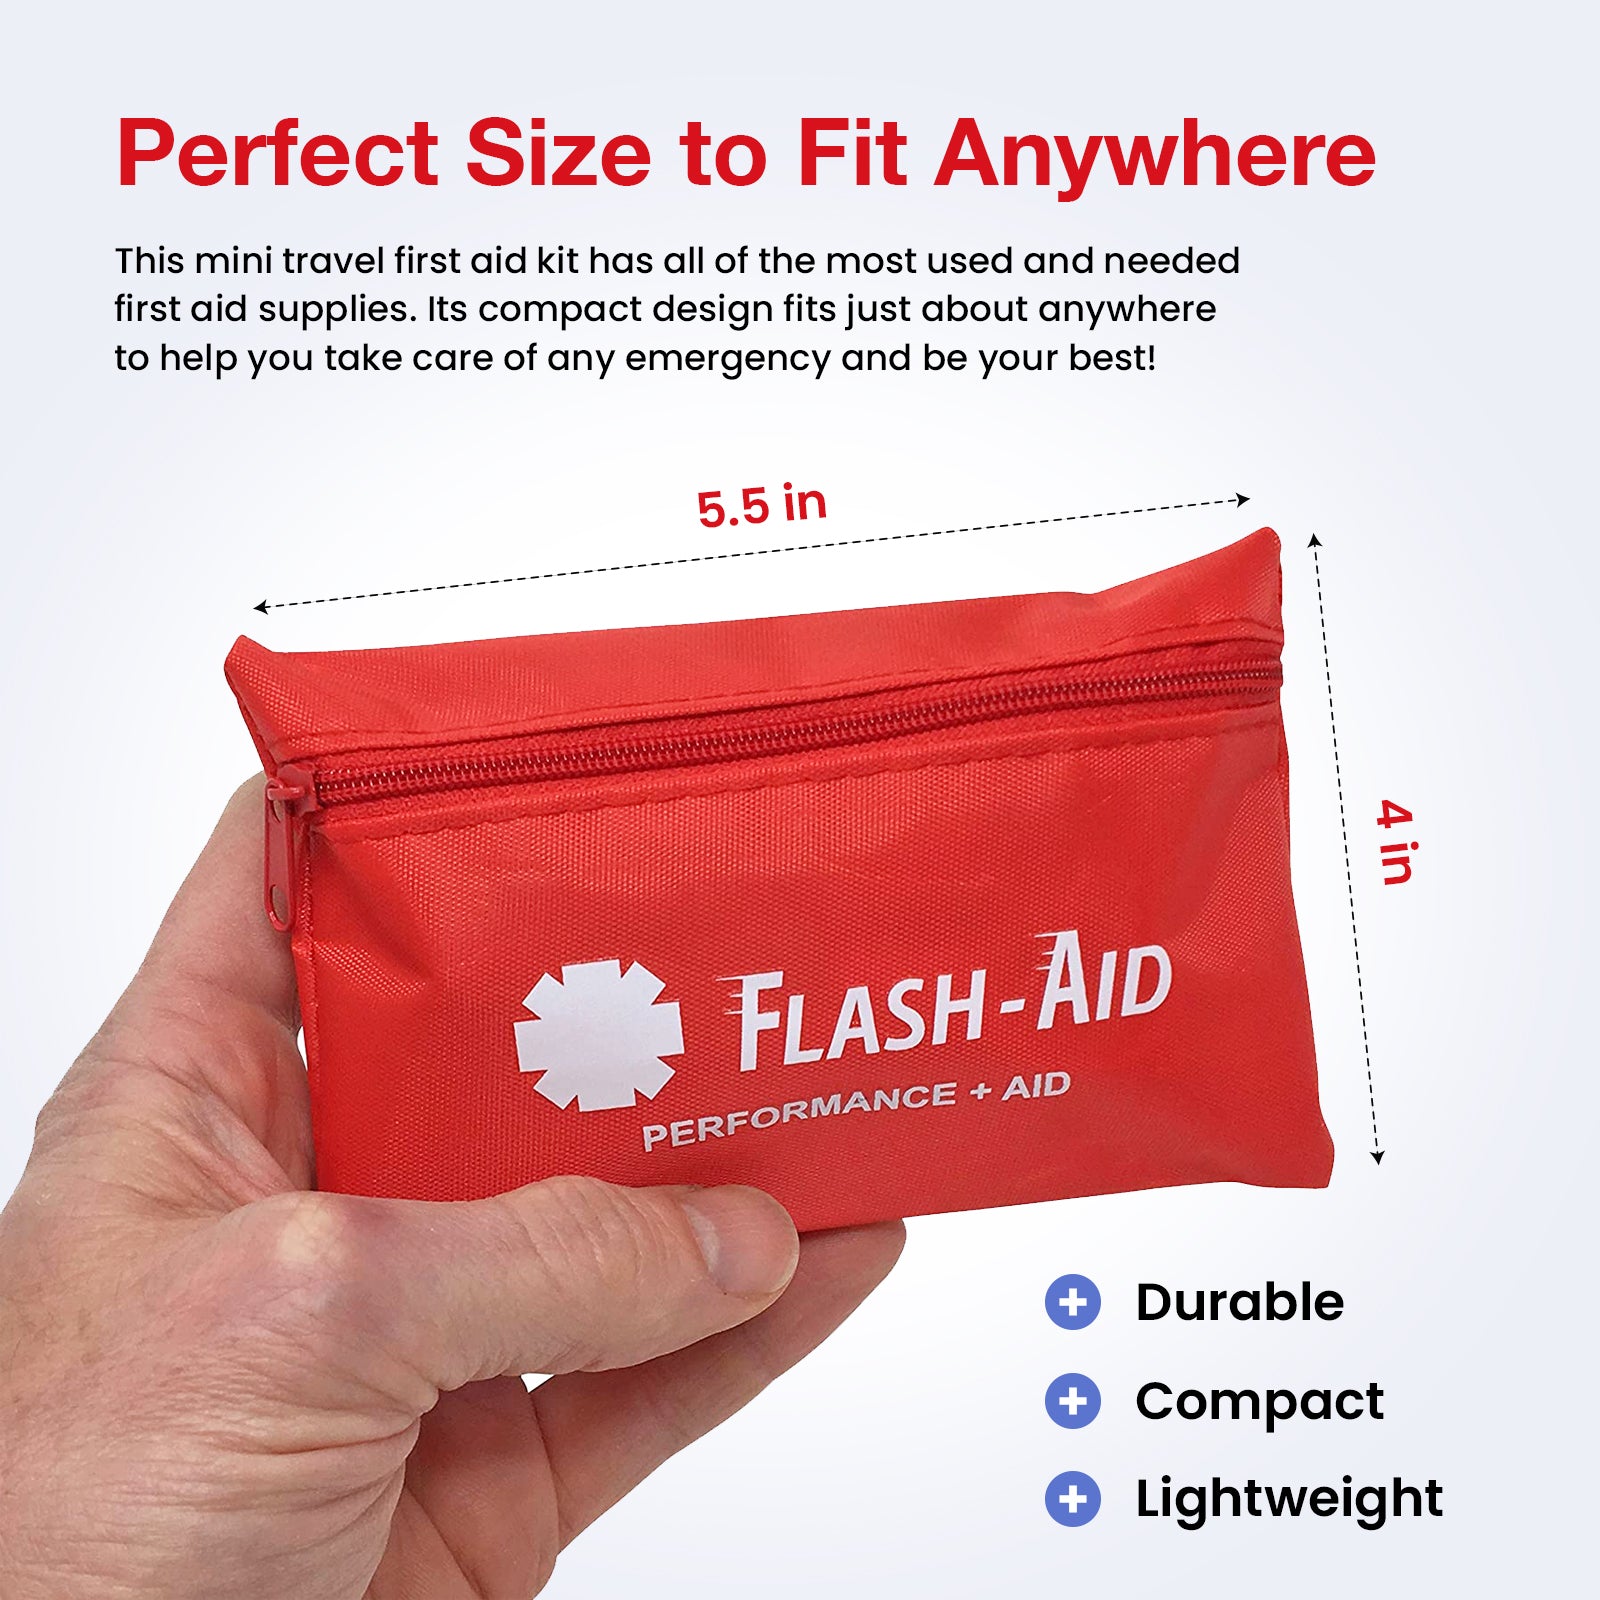 Amazon.com: Protect Life First Aid Kit for Home/Business | HSA/FSA Eligible Emergency  Kit | Hiking First aid kit Camping | Travel First Aid Kit for Car|Small  First Aid Kit Travel/Survival Medical kit -